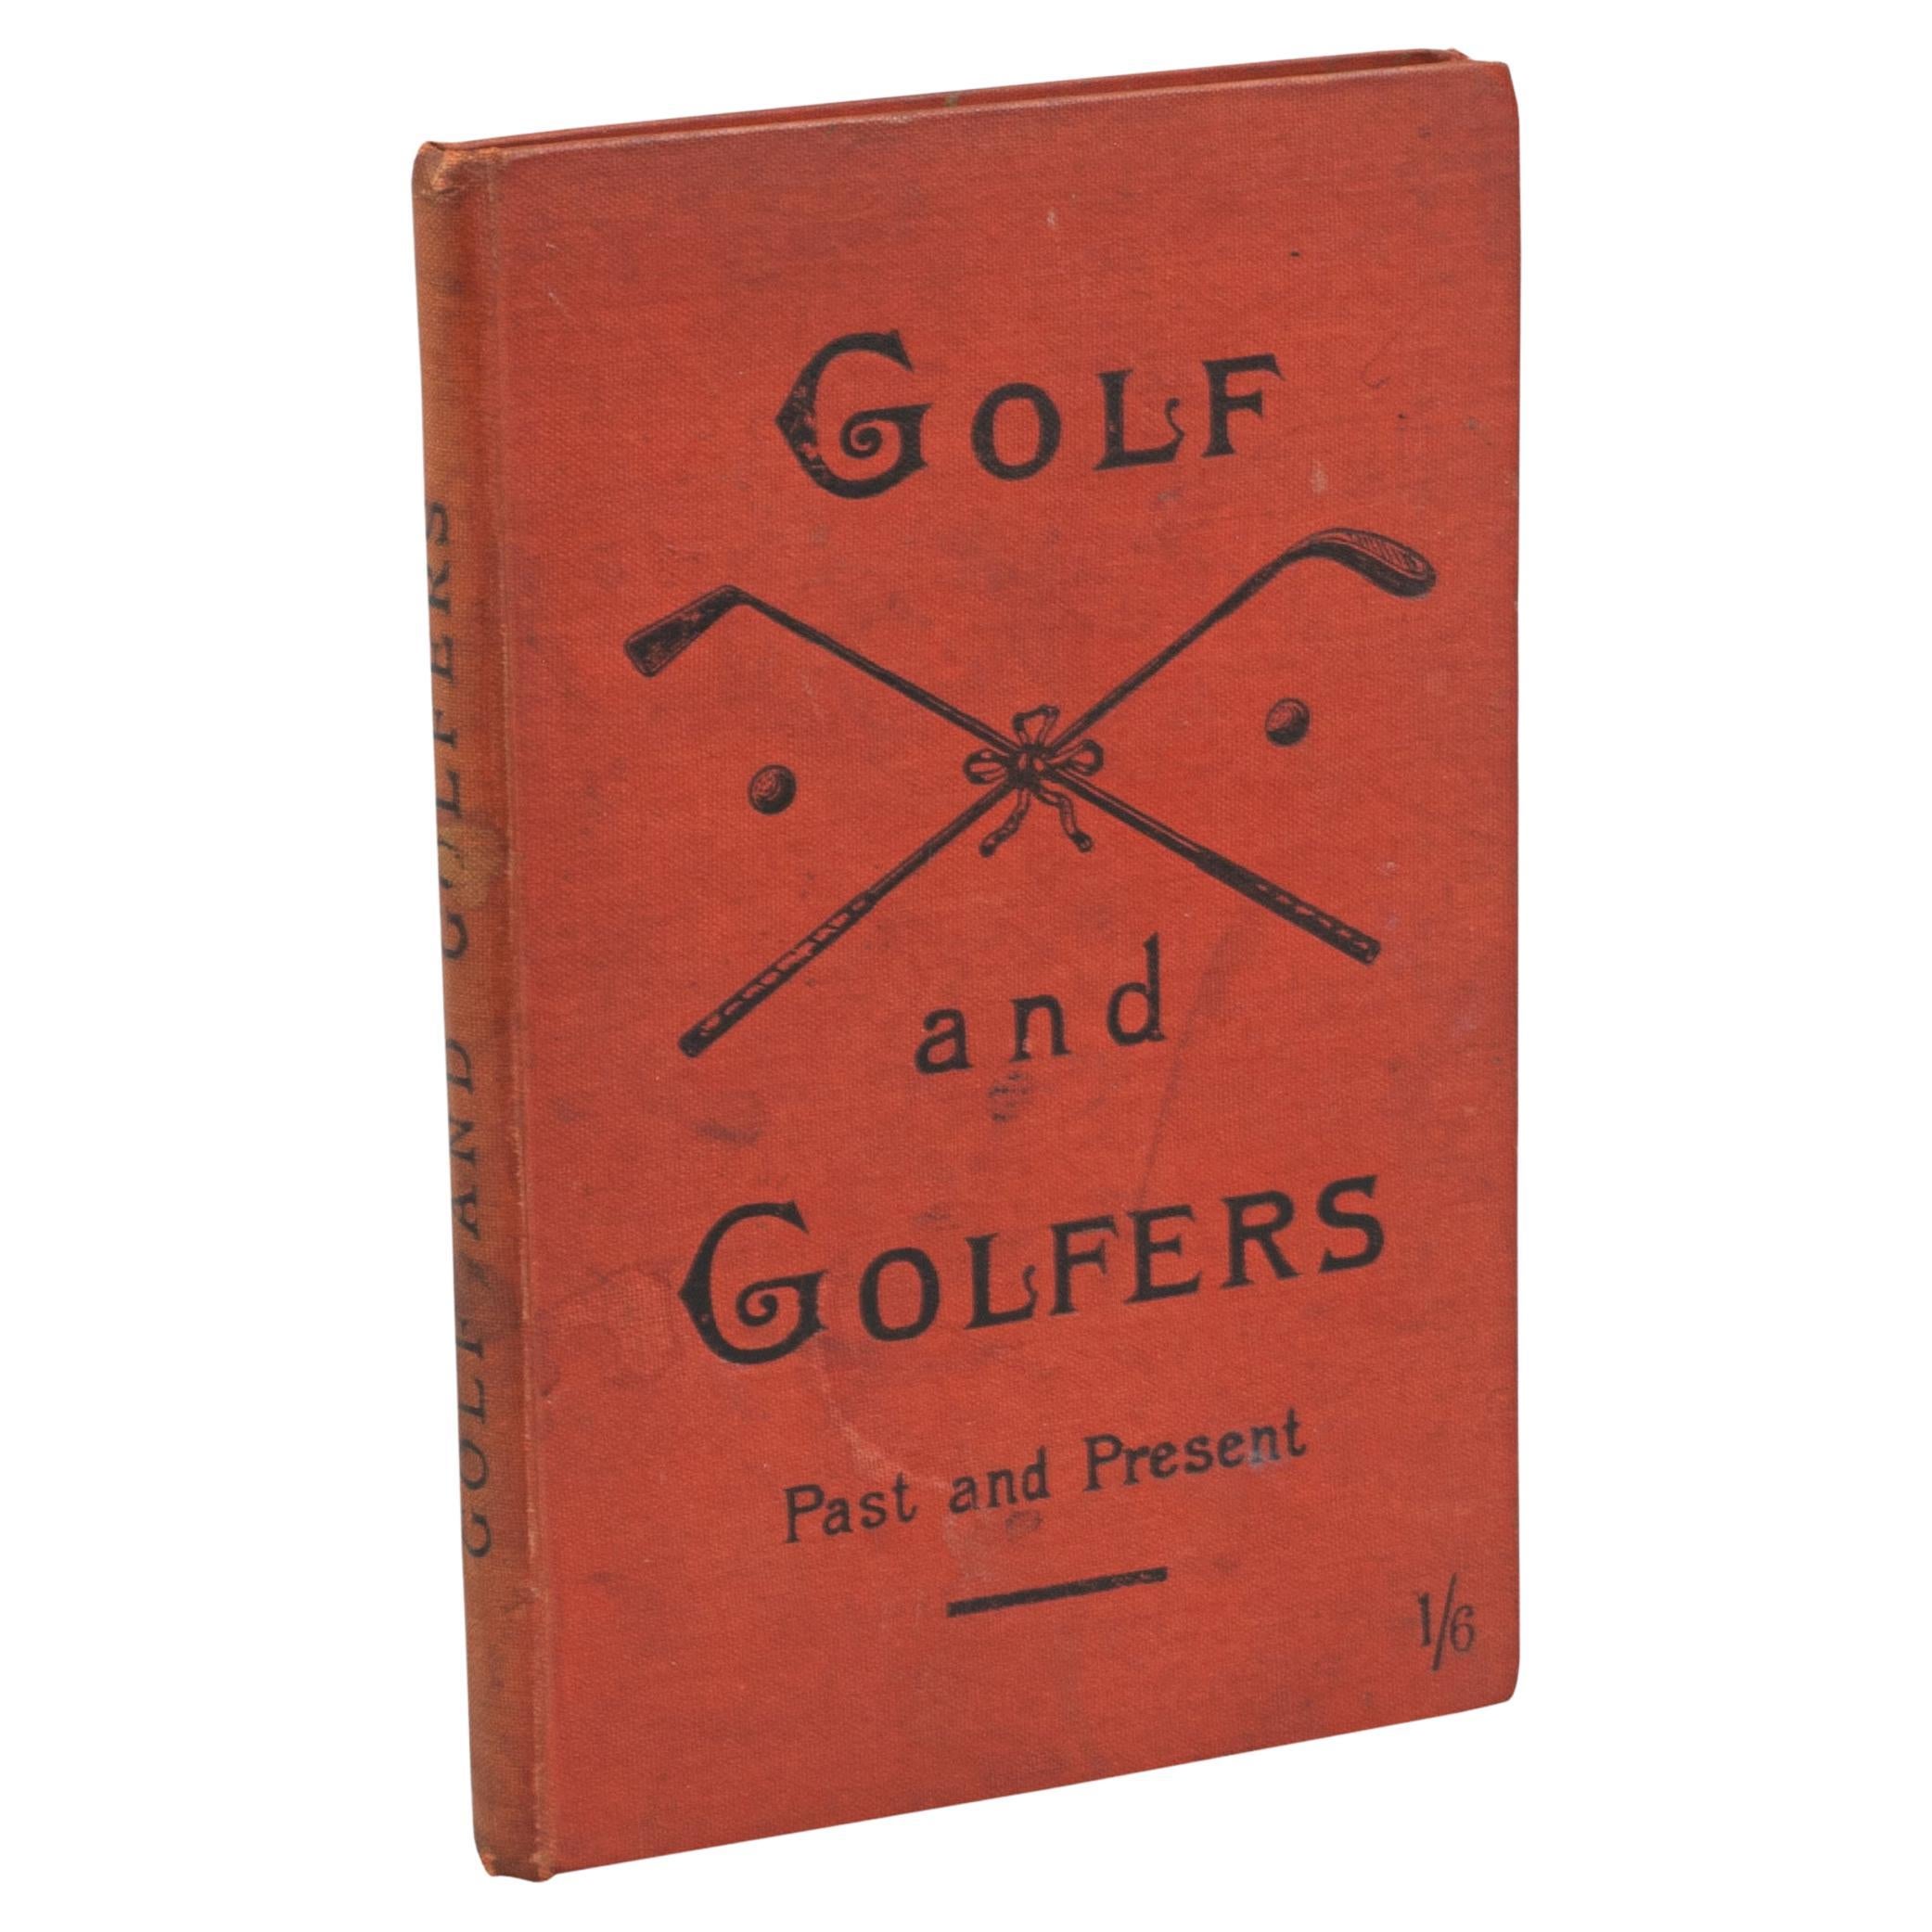 Vintage Golf Book, Golf and Golfers, Past and Present. For Sale